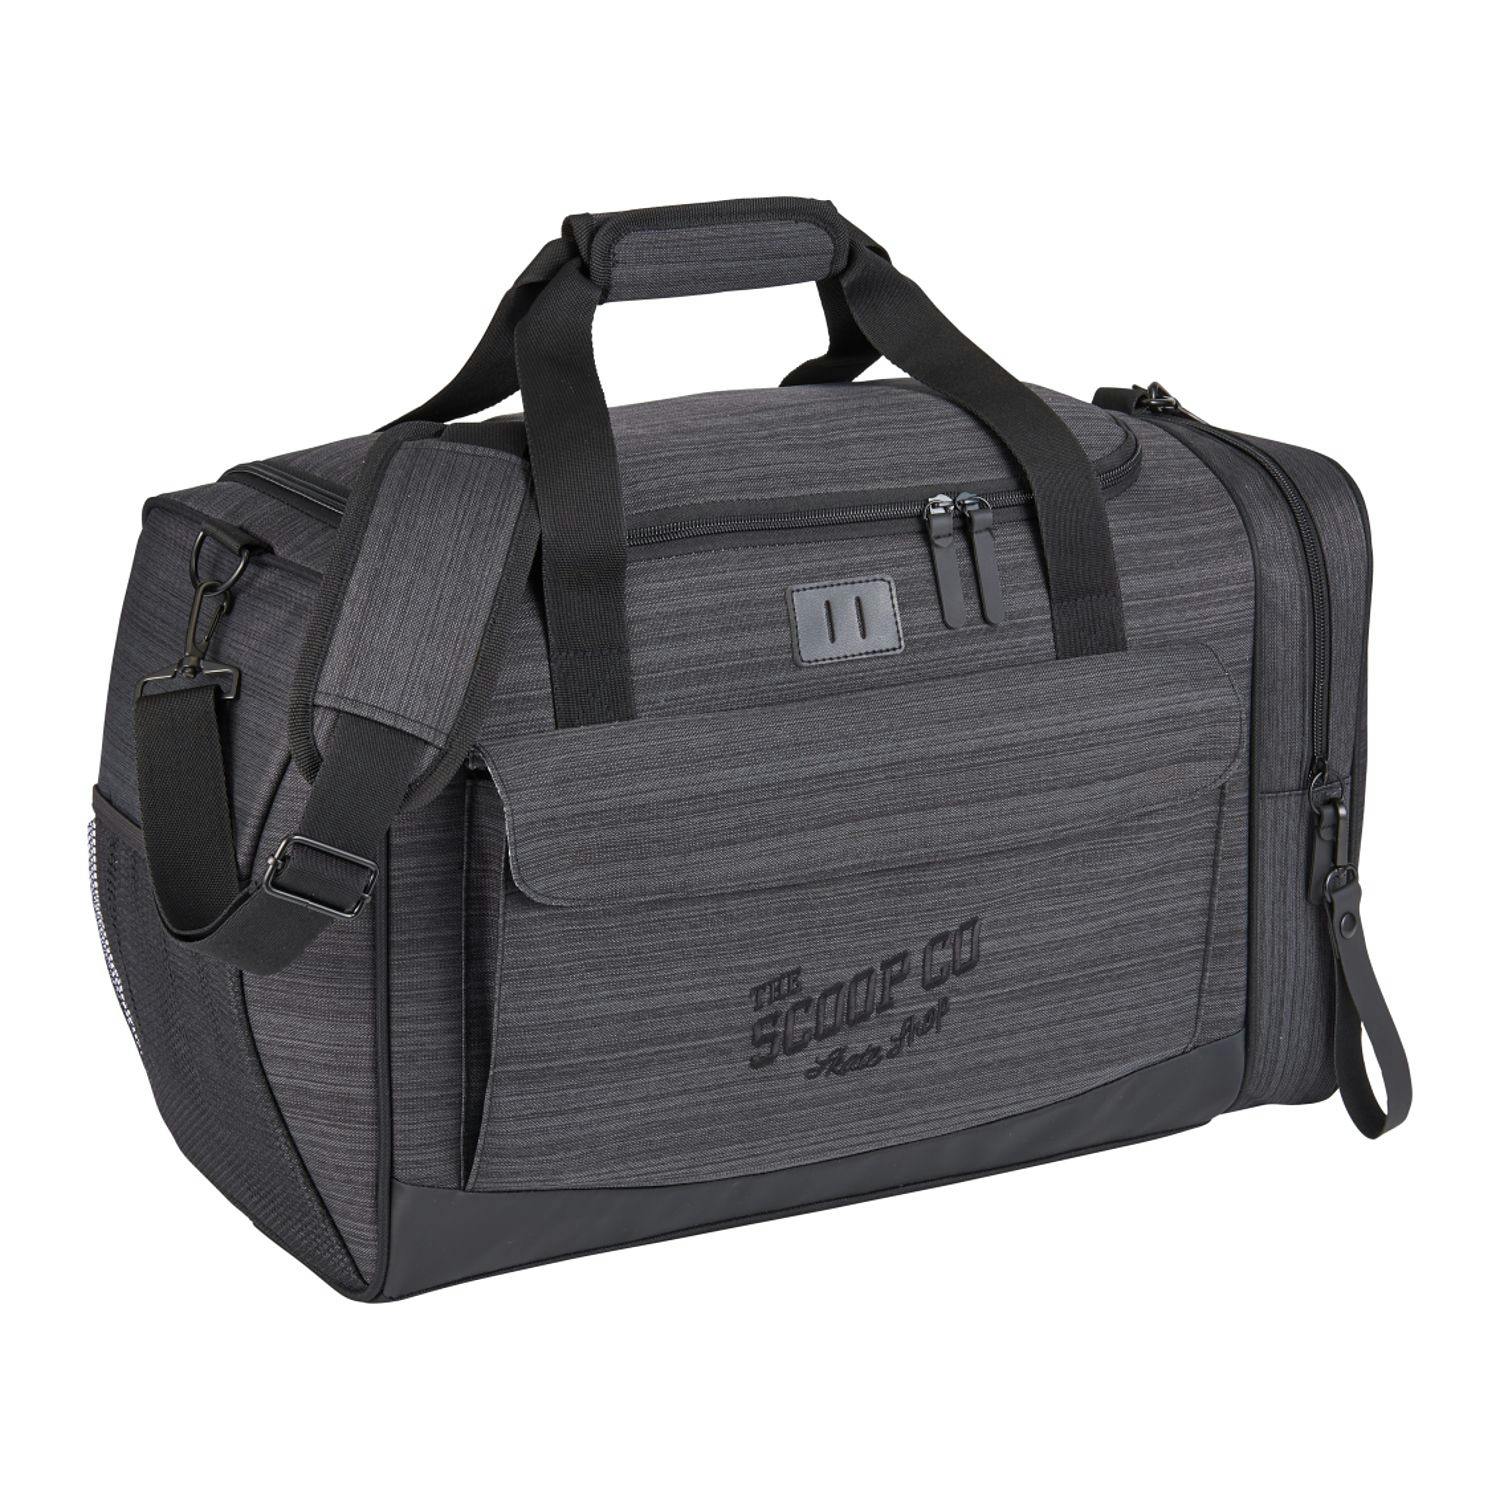 NBN Whitby Duffel - additional Image 1